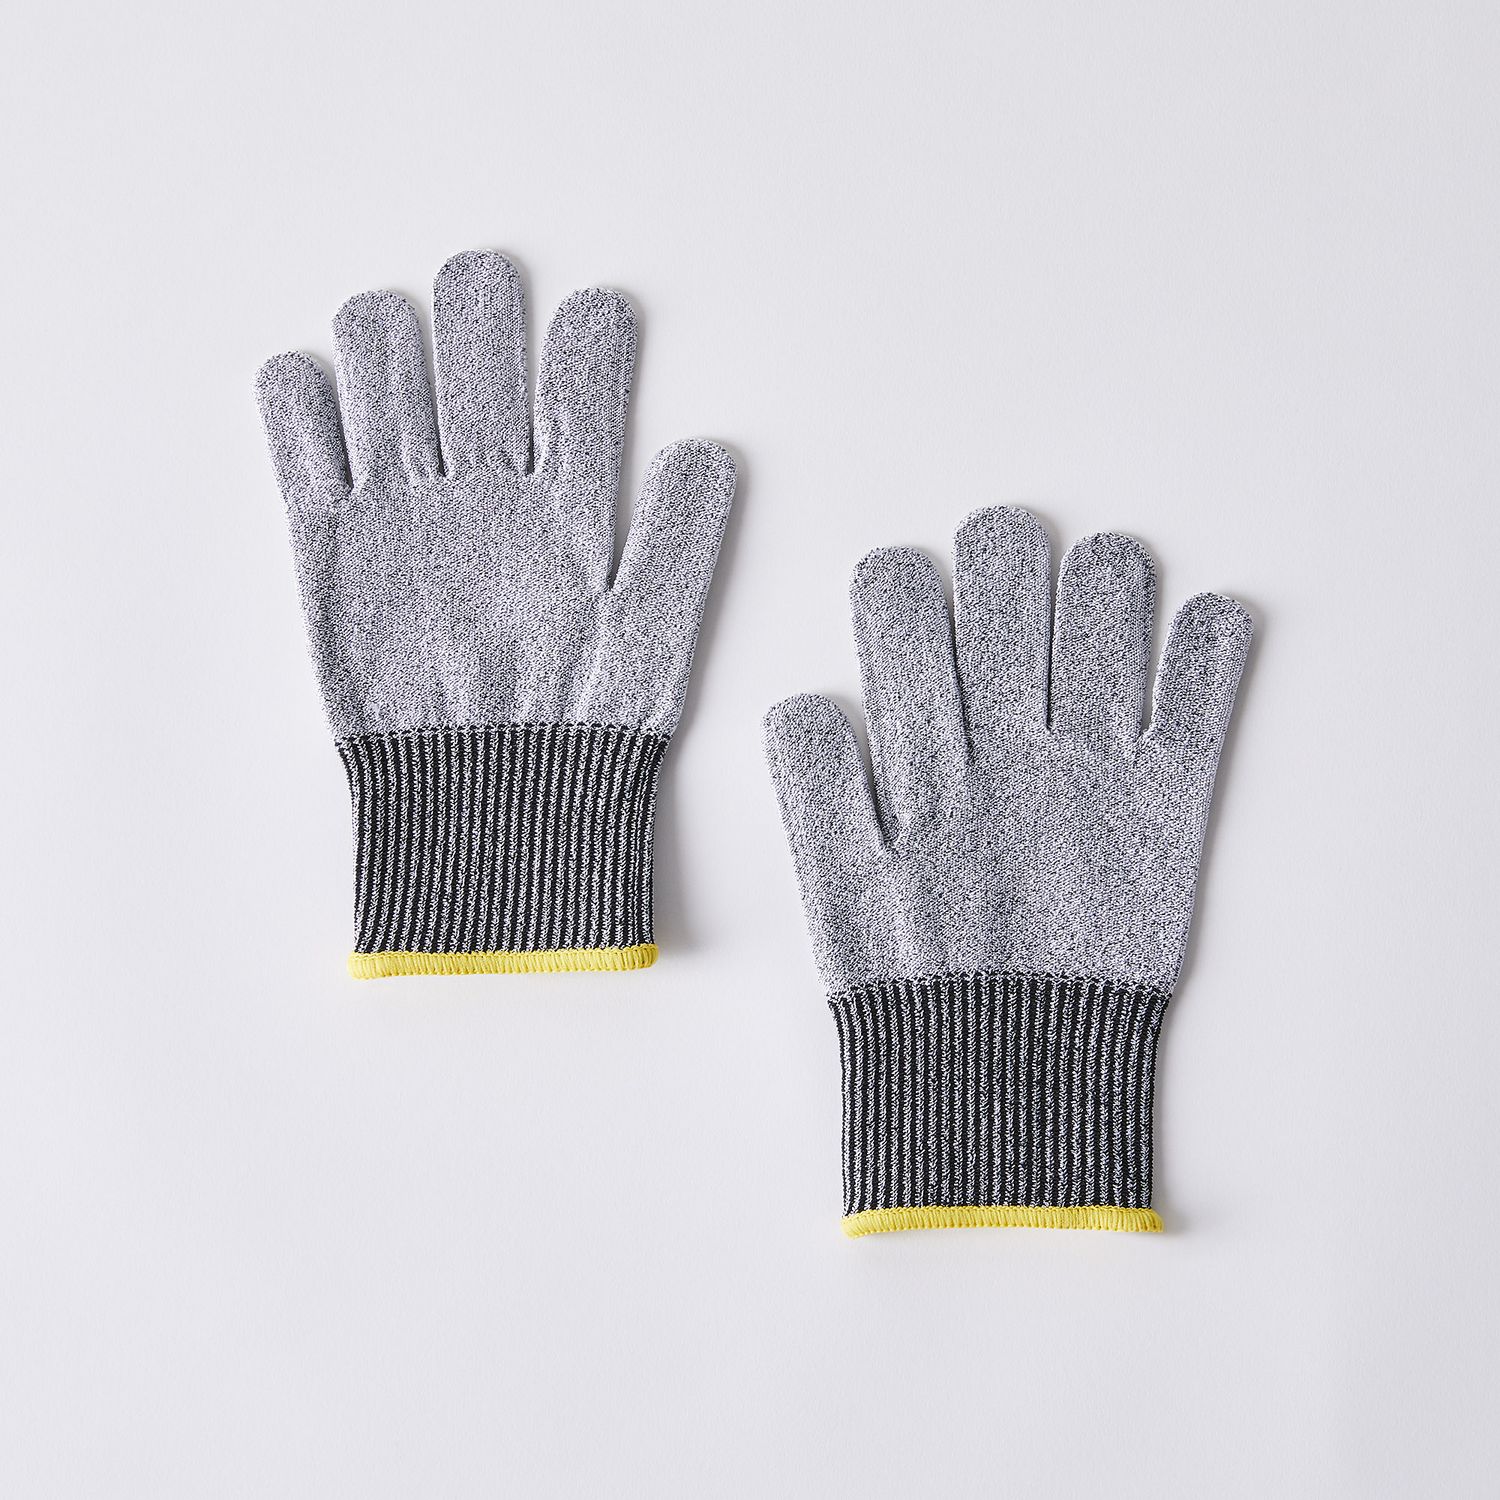 CUT RESISTANT KITCHEN GLOVES: Food Safe with High Performance Level 5 –  Kibaron